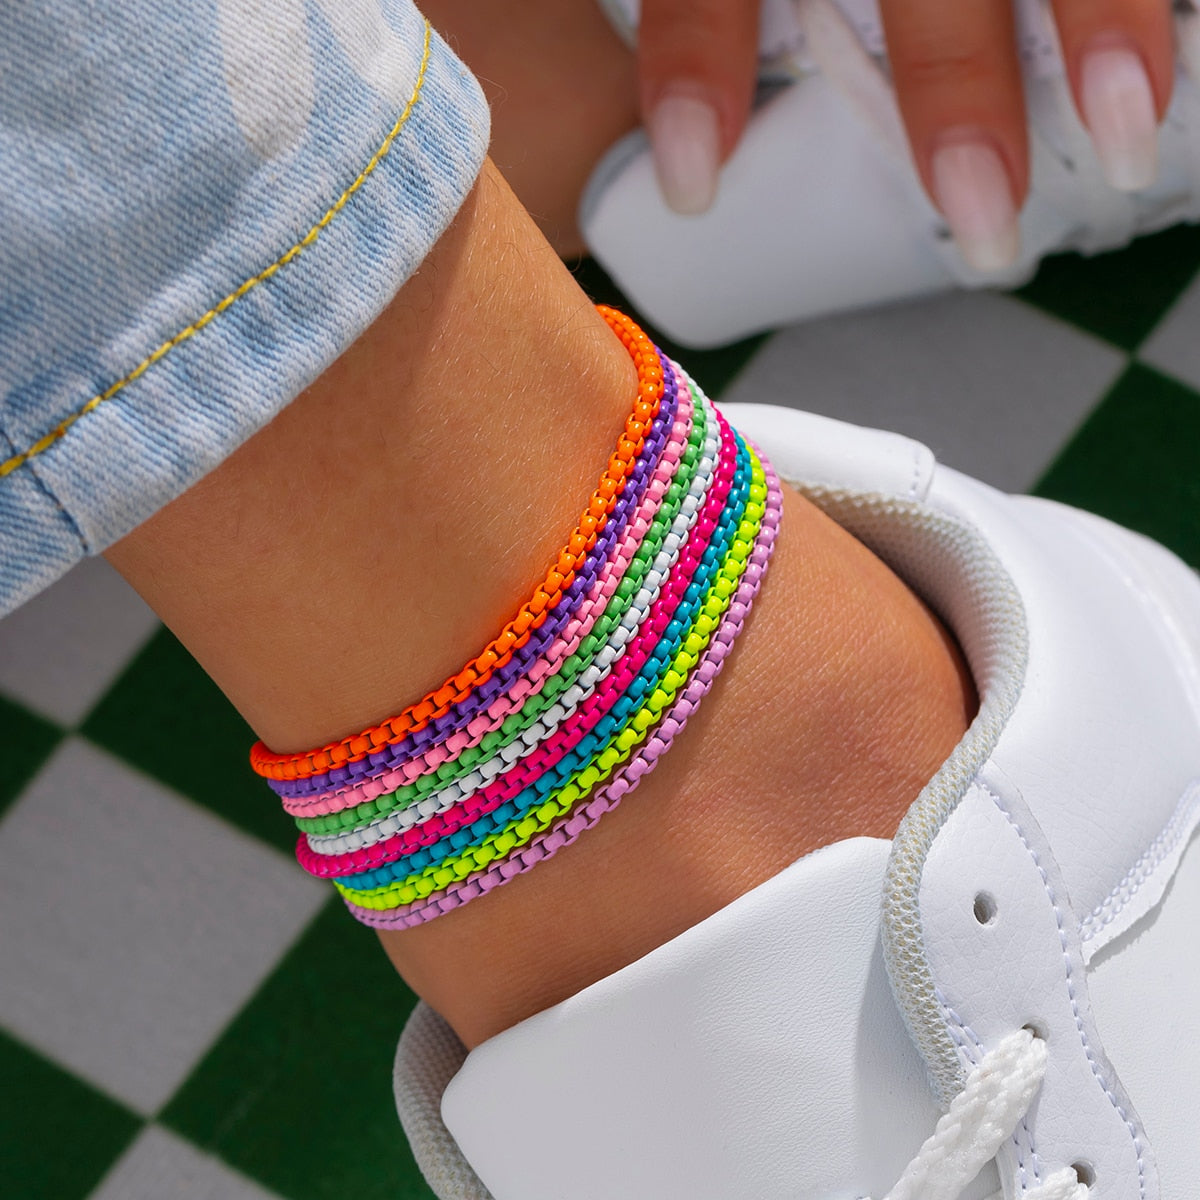 9 Colors Unique Adjustable Iron Anklet Bracelet for Women Summer Beach Thin Ankle Barefoot Y2K Female Foot Jewelry